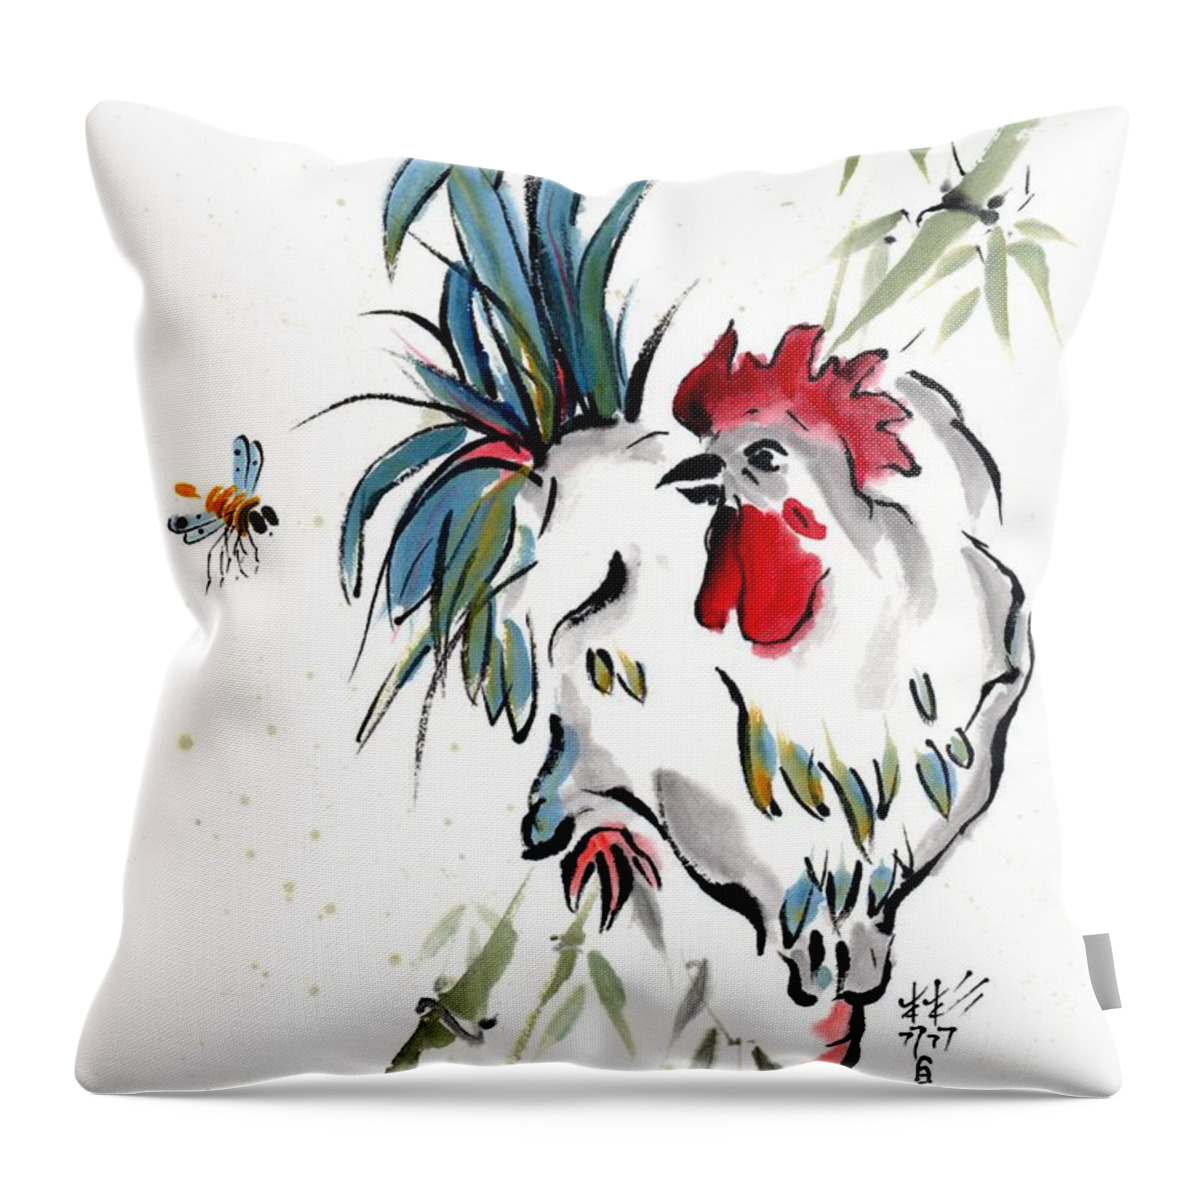 Chinese Brush Painting Throw Pillow featuring the painting Walkabout by Bill Searle